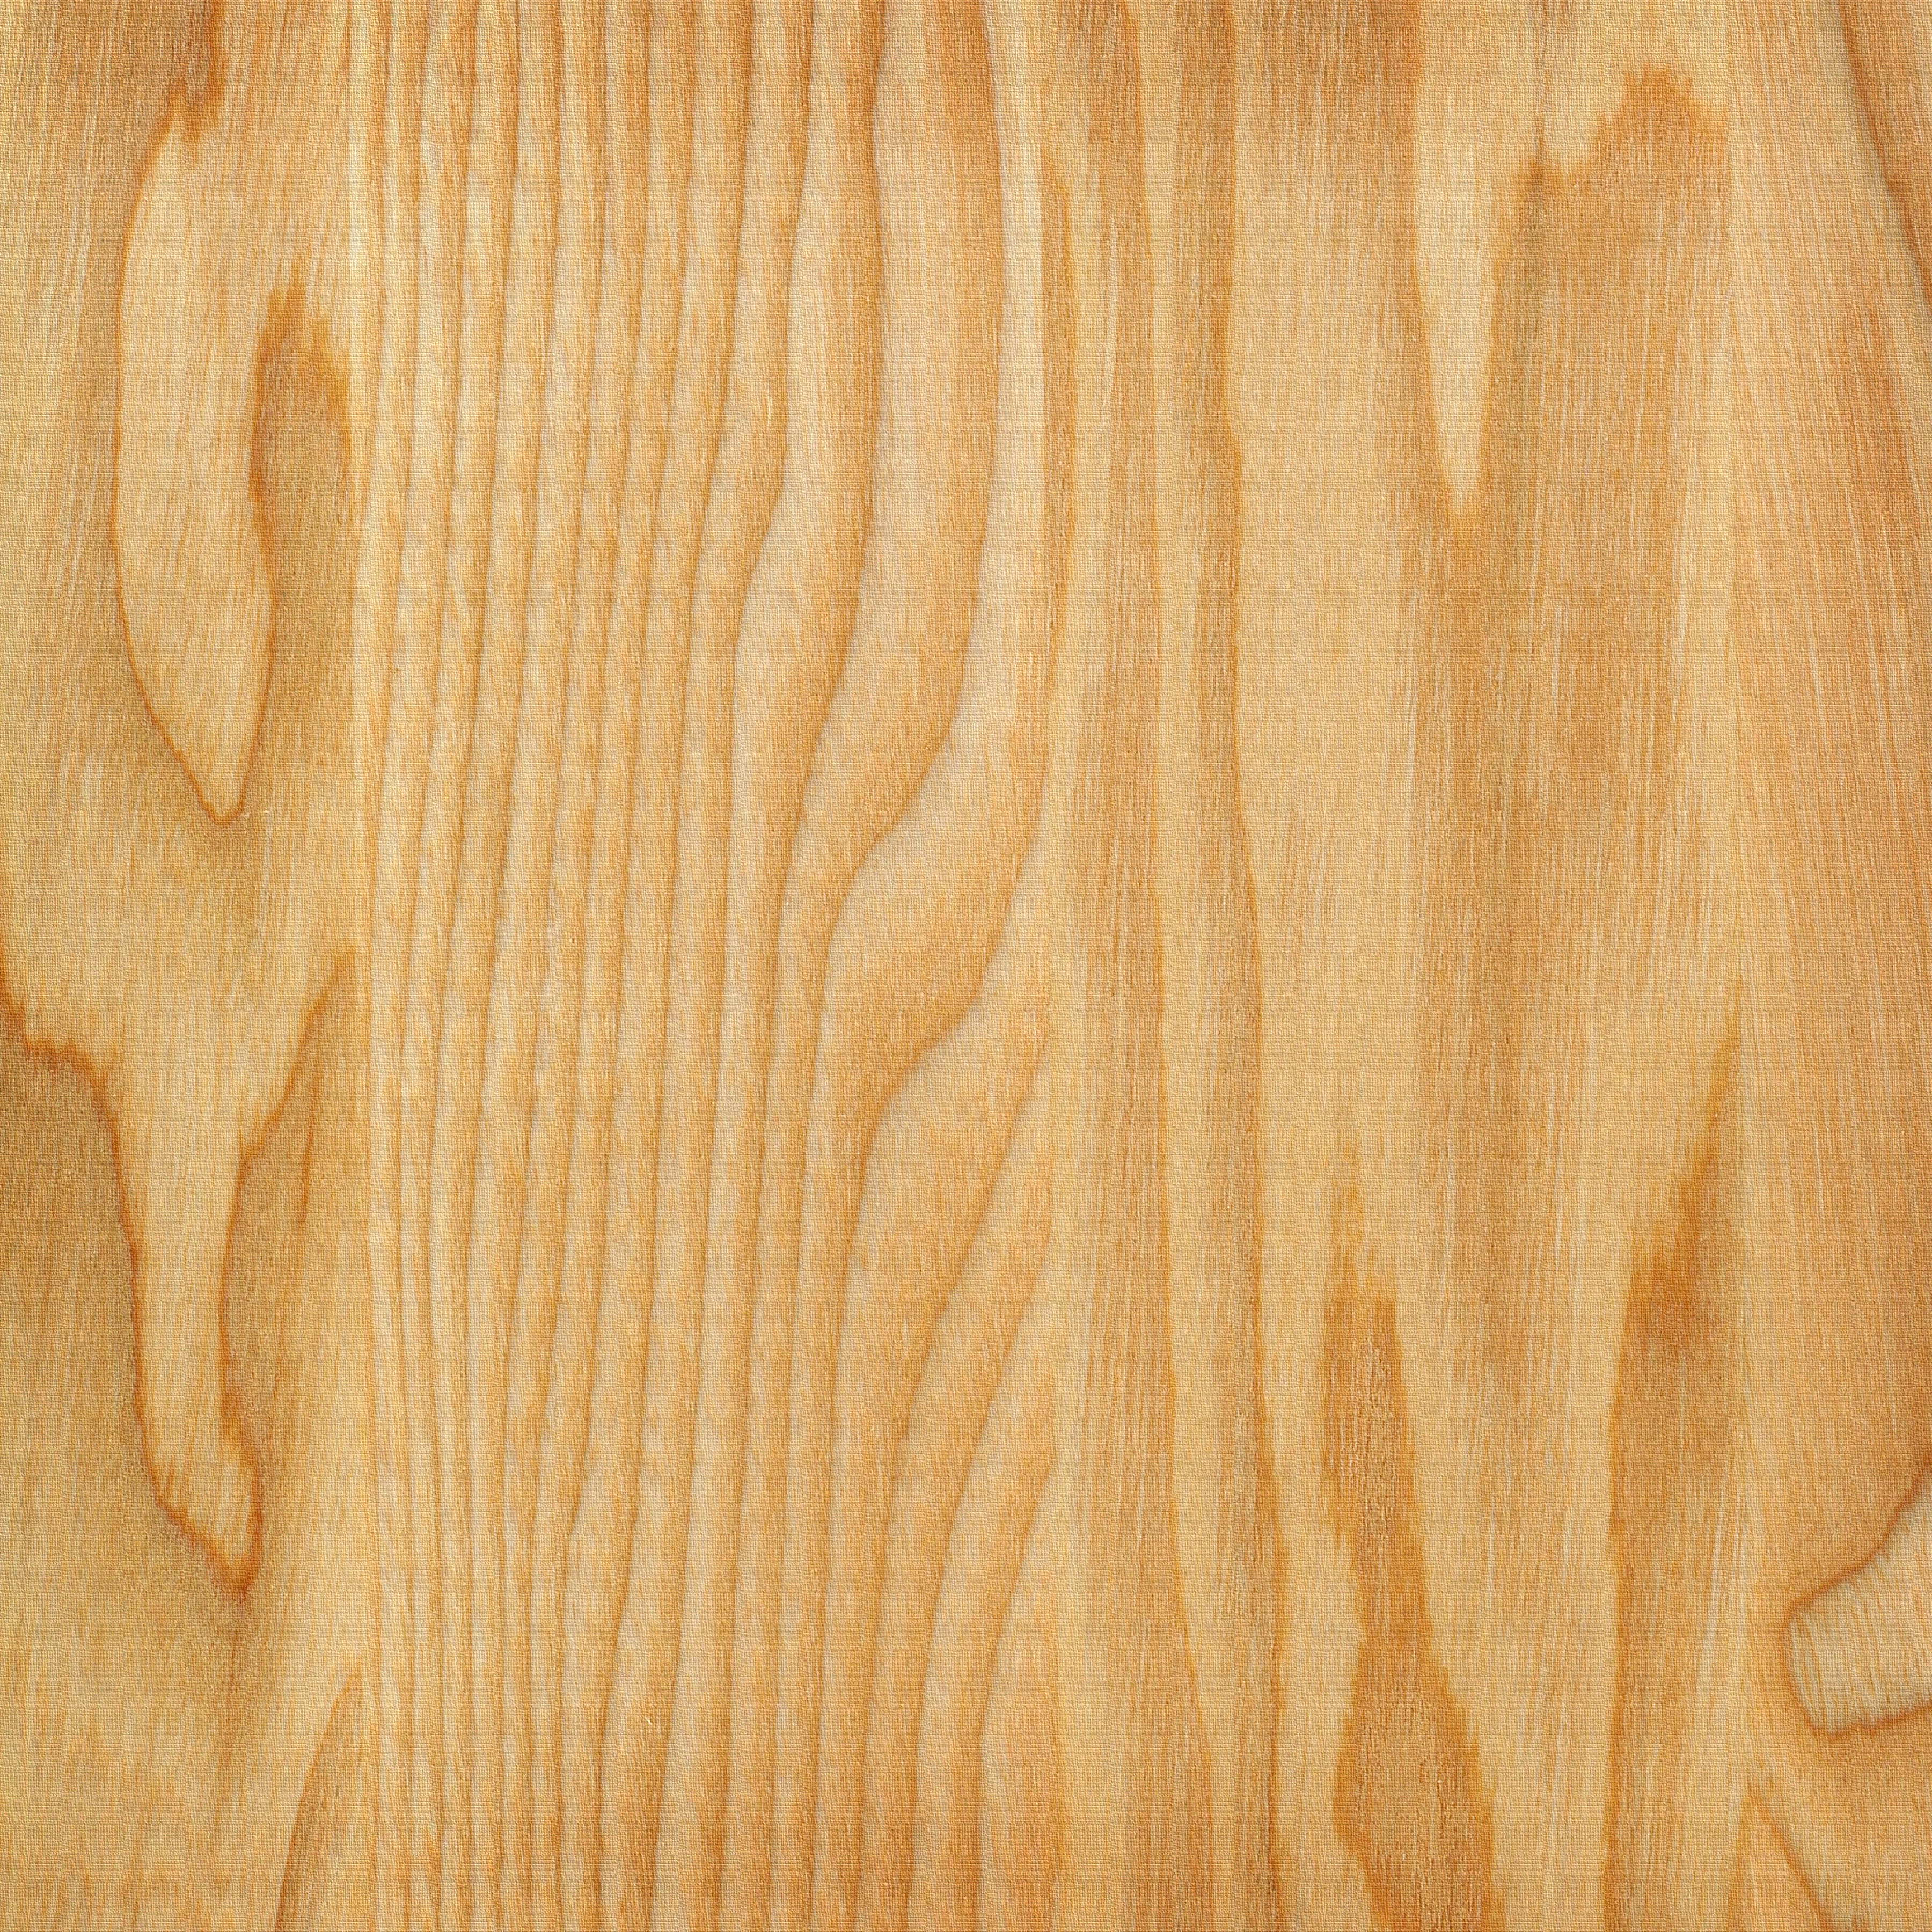 326 Wood, August 12, - High Quality Wood Texture - HD Wallpaper 